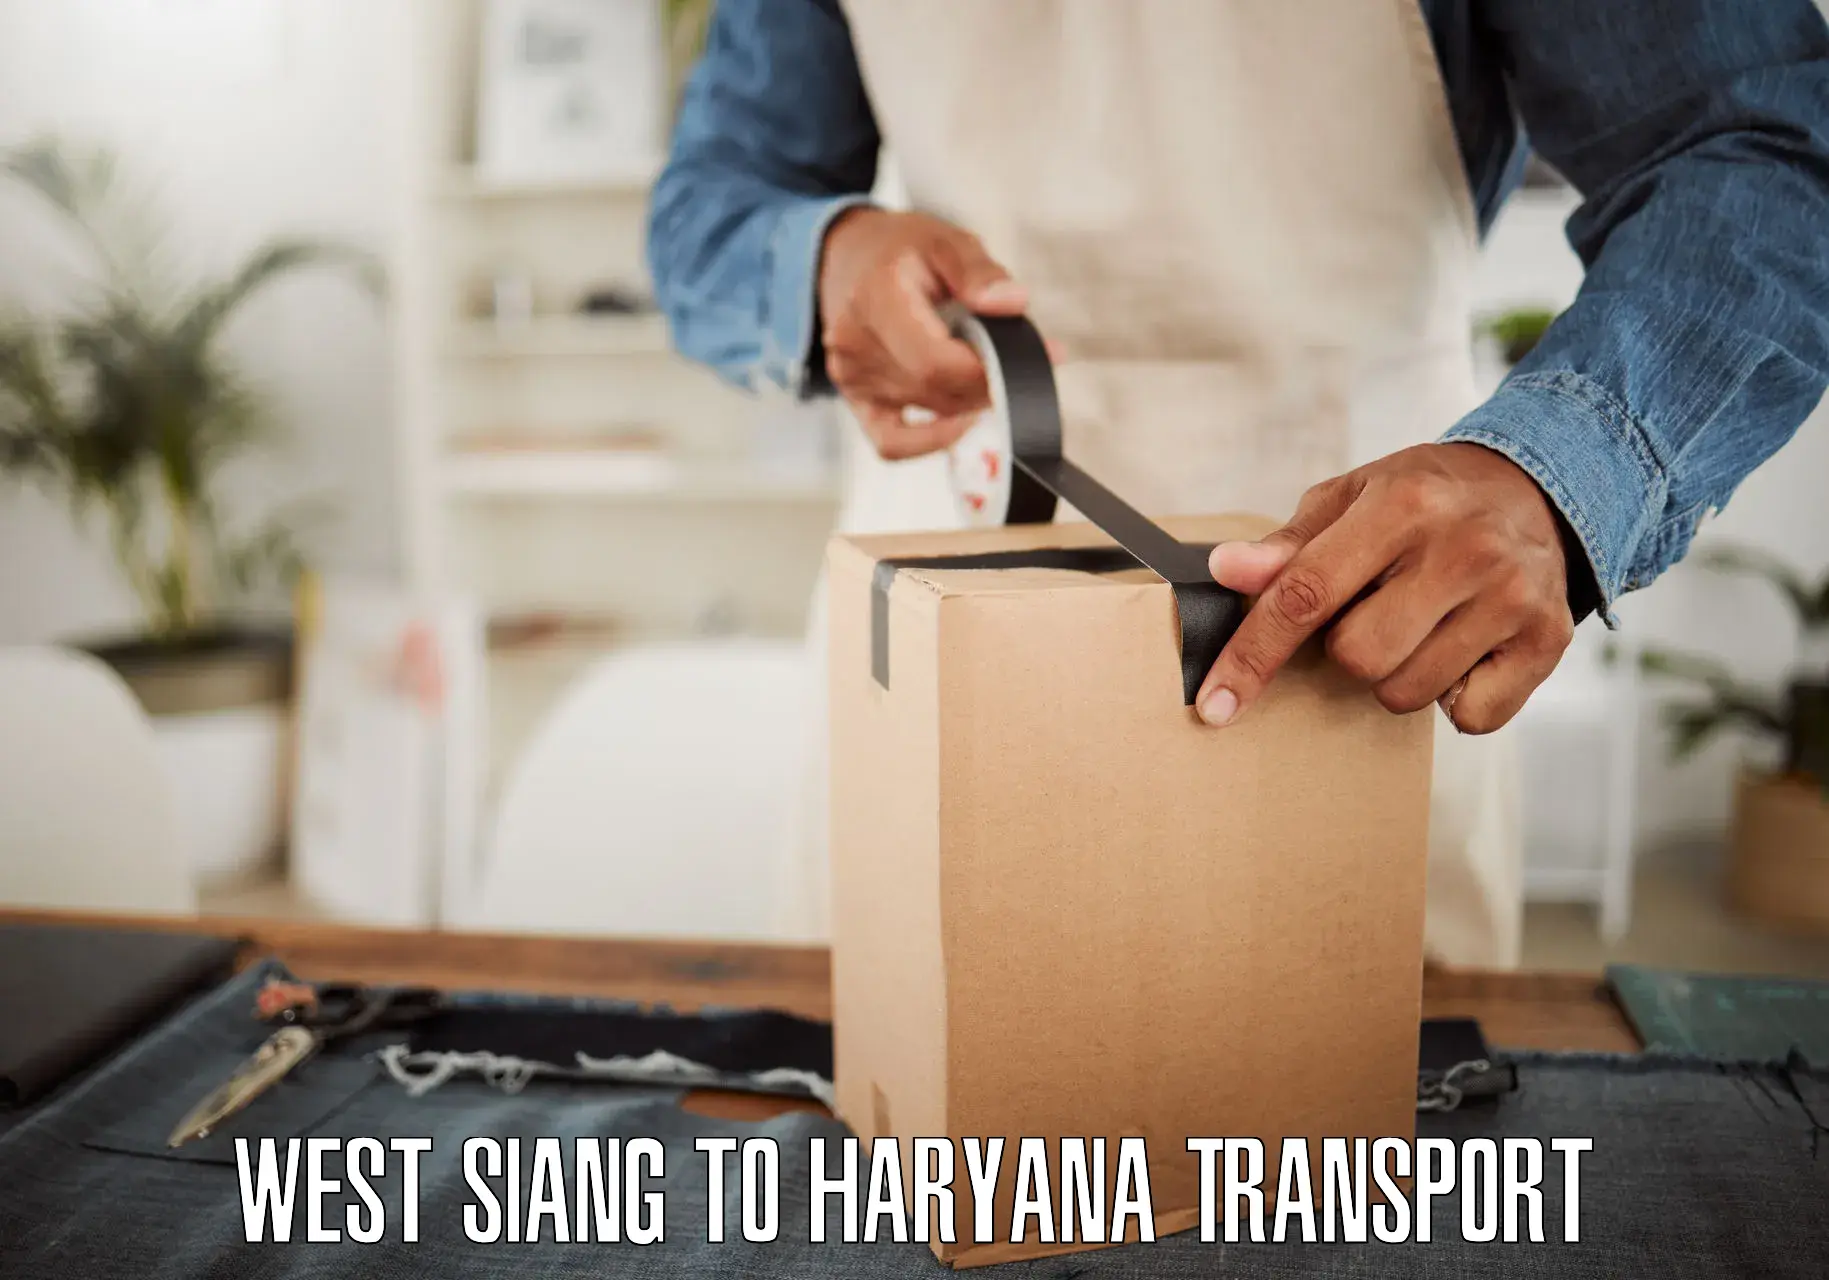 Bike transport service West Siang to Haryana